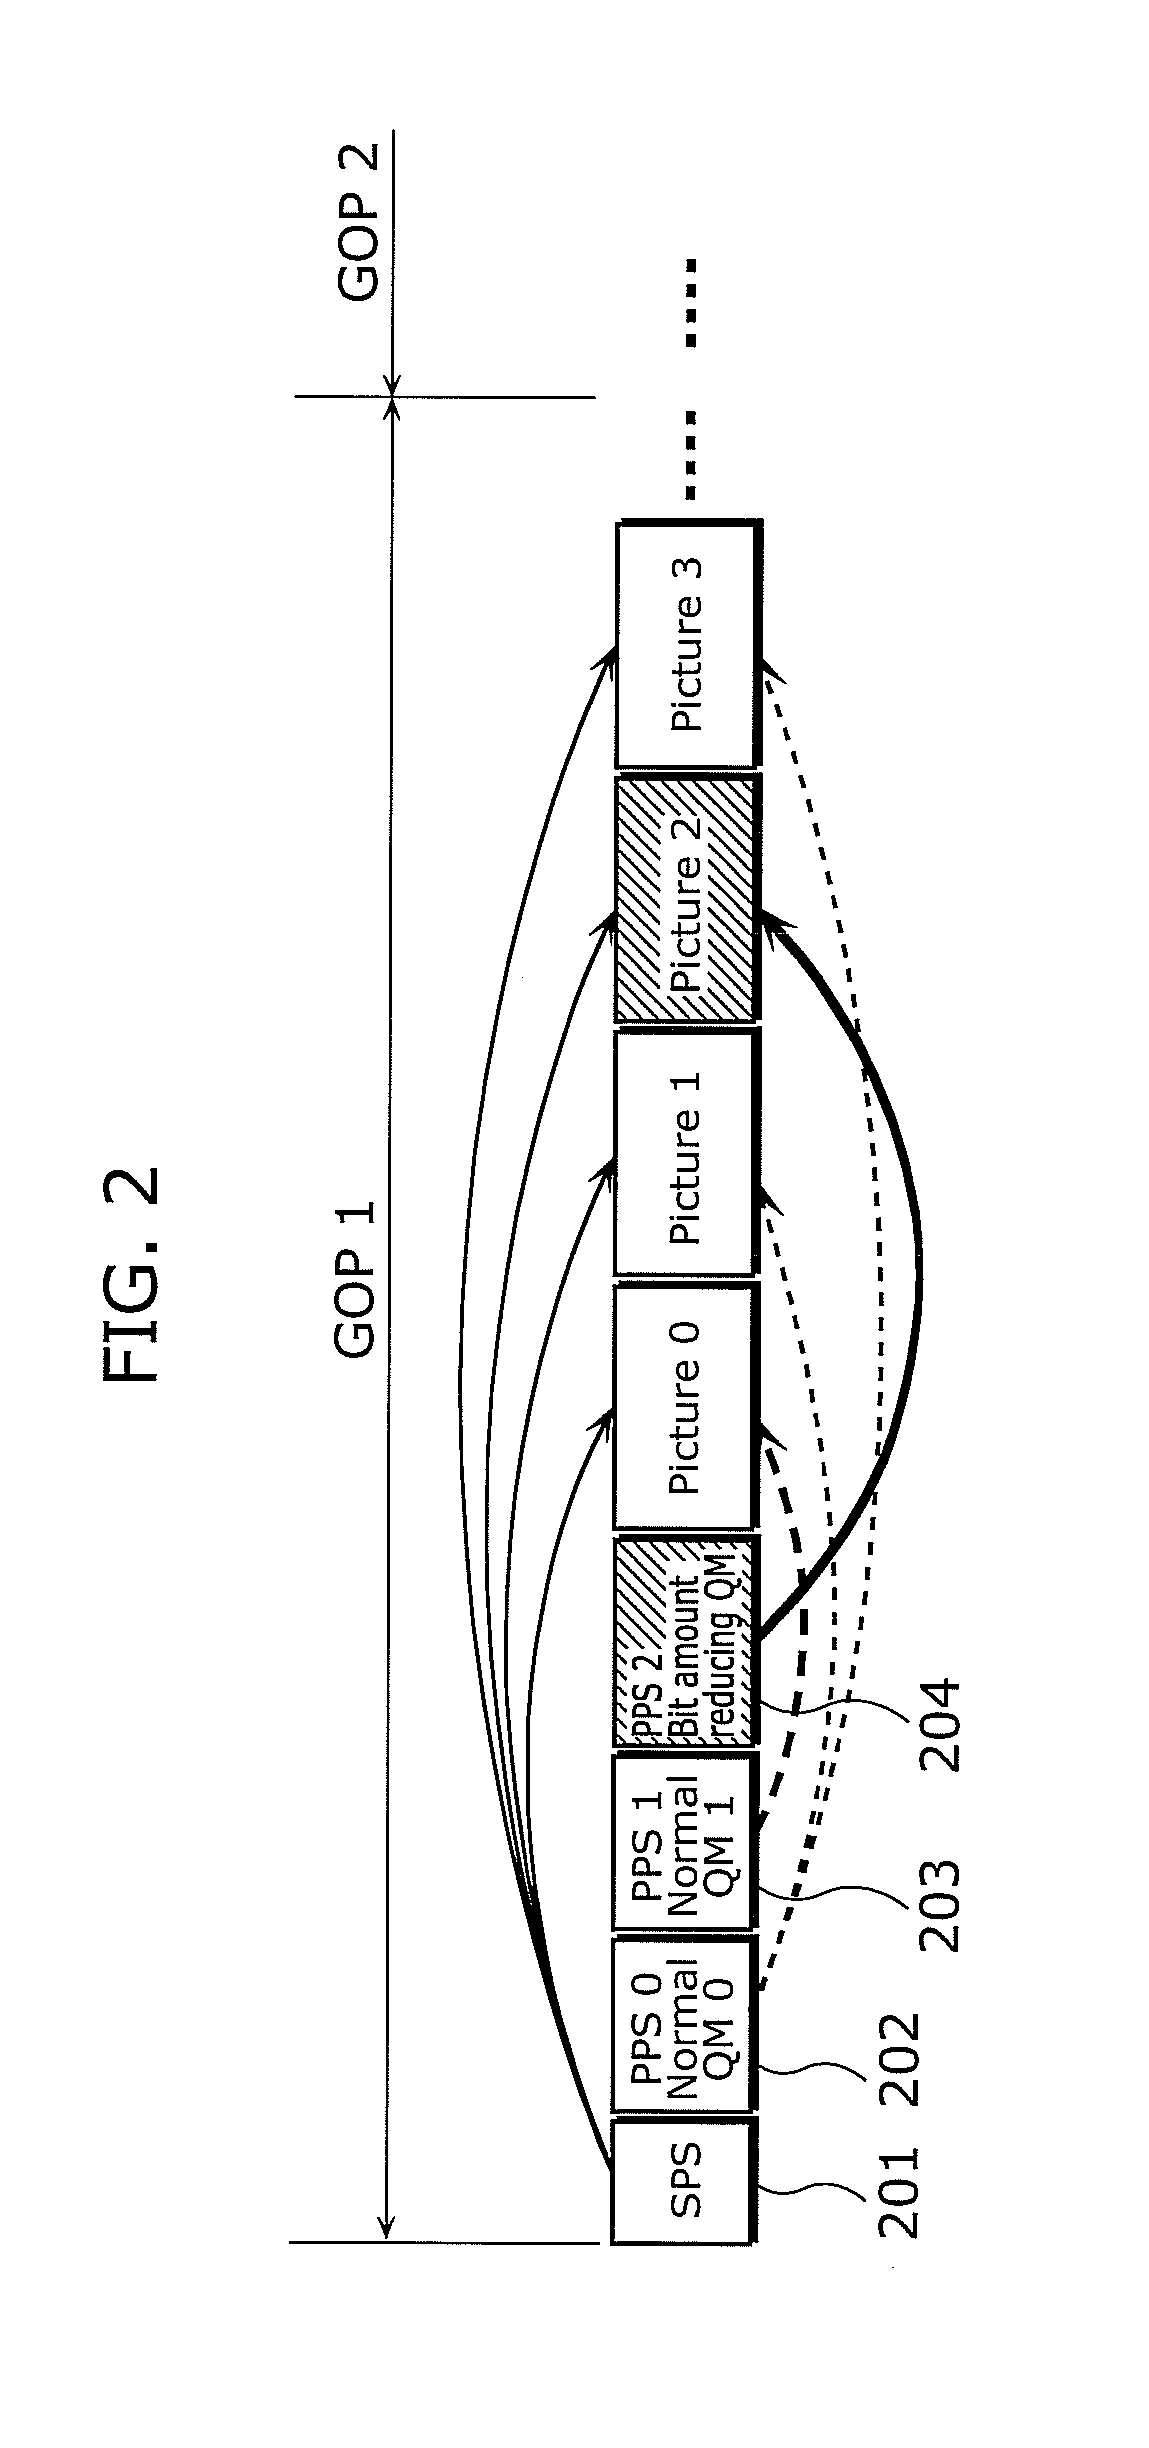 Moving picture coding device and broadcast wave recording device